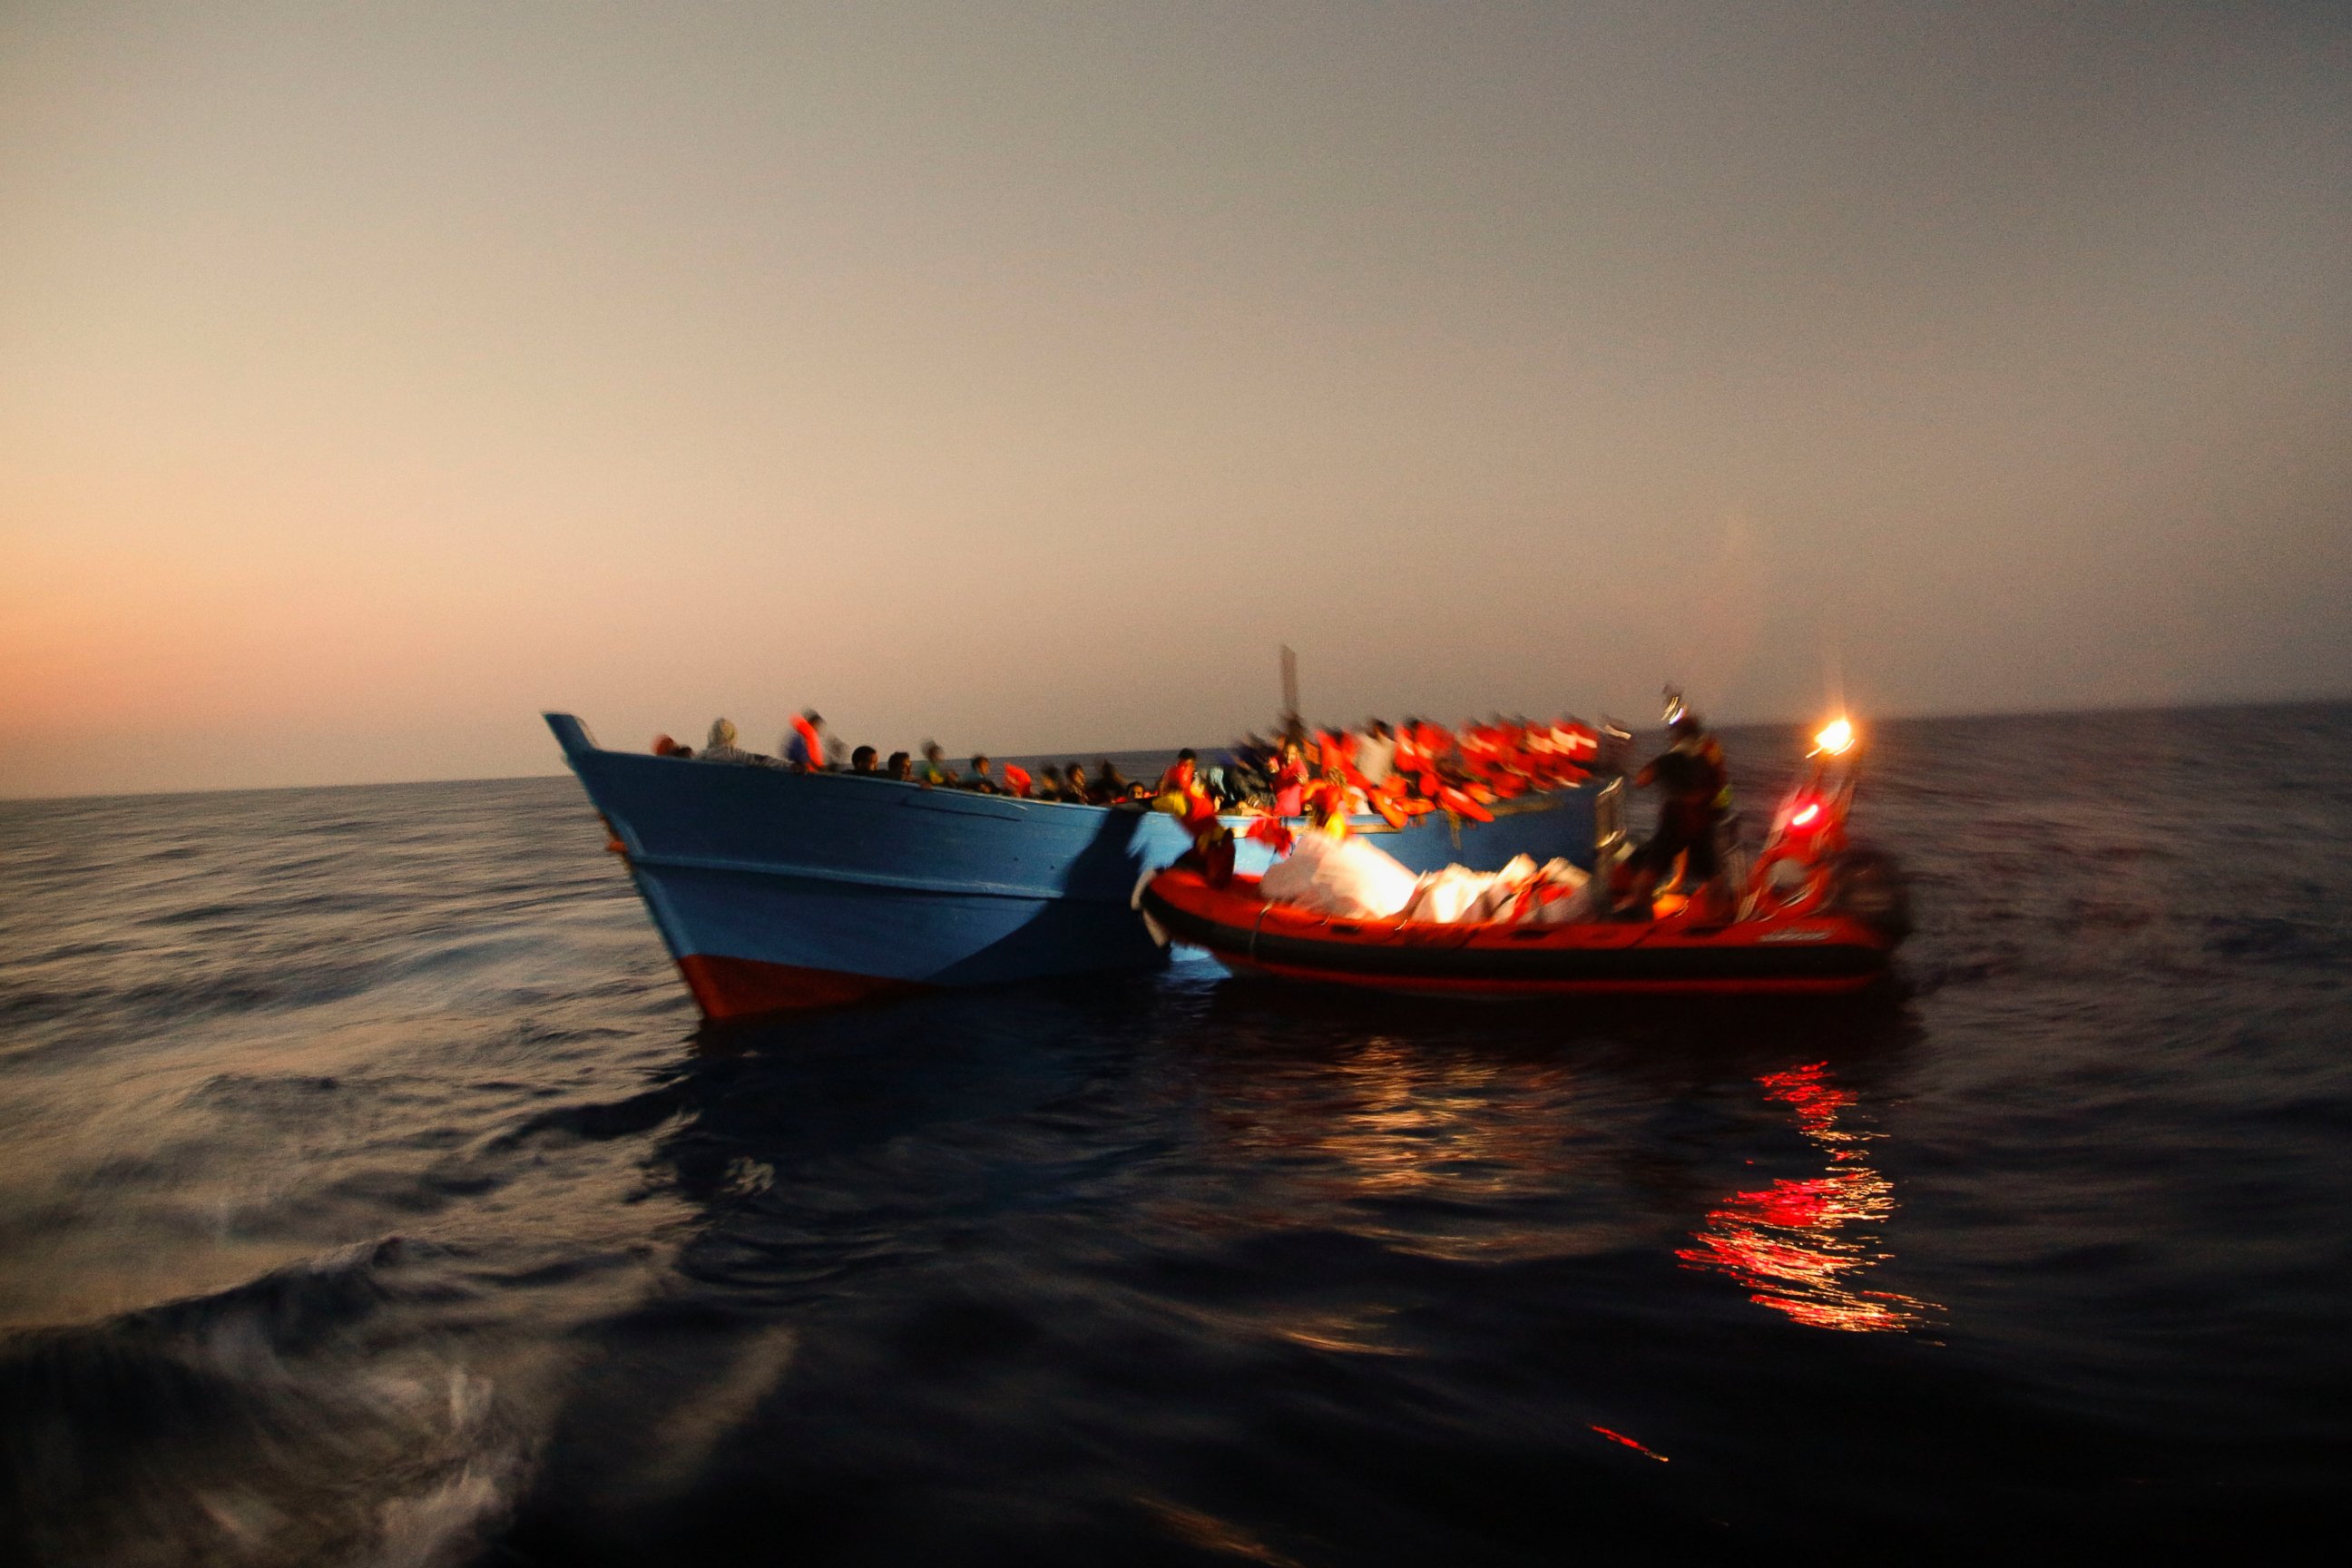 PHOTO: Migrants sailing in a crowded wooden boat carrying more than seven hundred migrants, are helped by members of an NGO  during a rescue operation at the Mediterranean sea, about 13 miles north of Sabratha, Libya, Aug. 29, 2016.